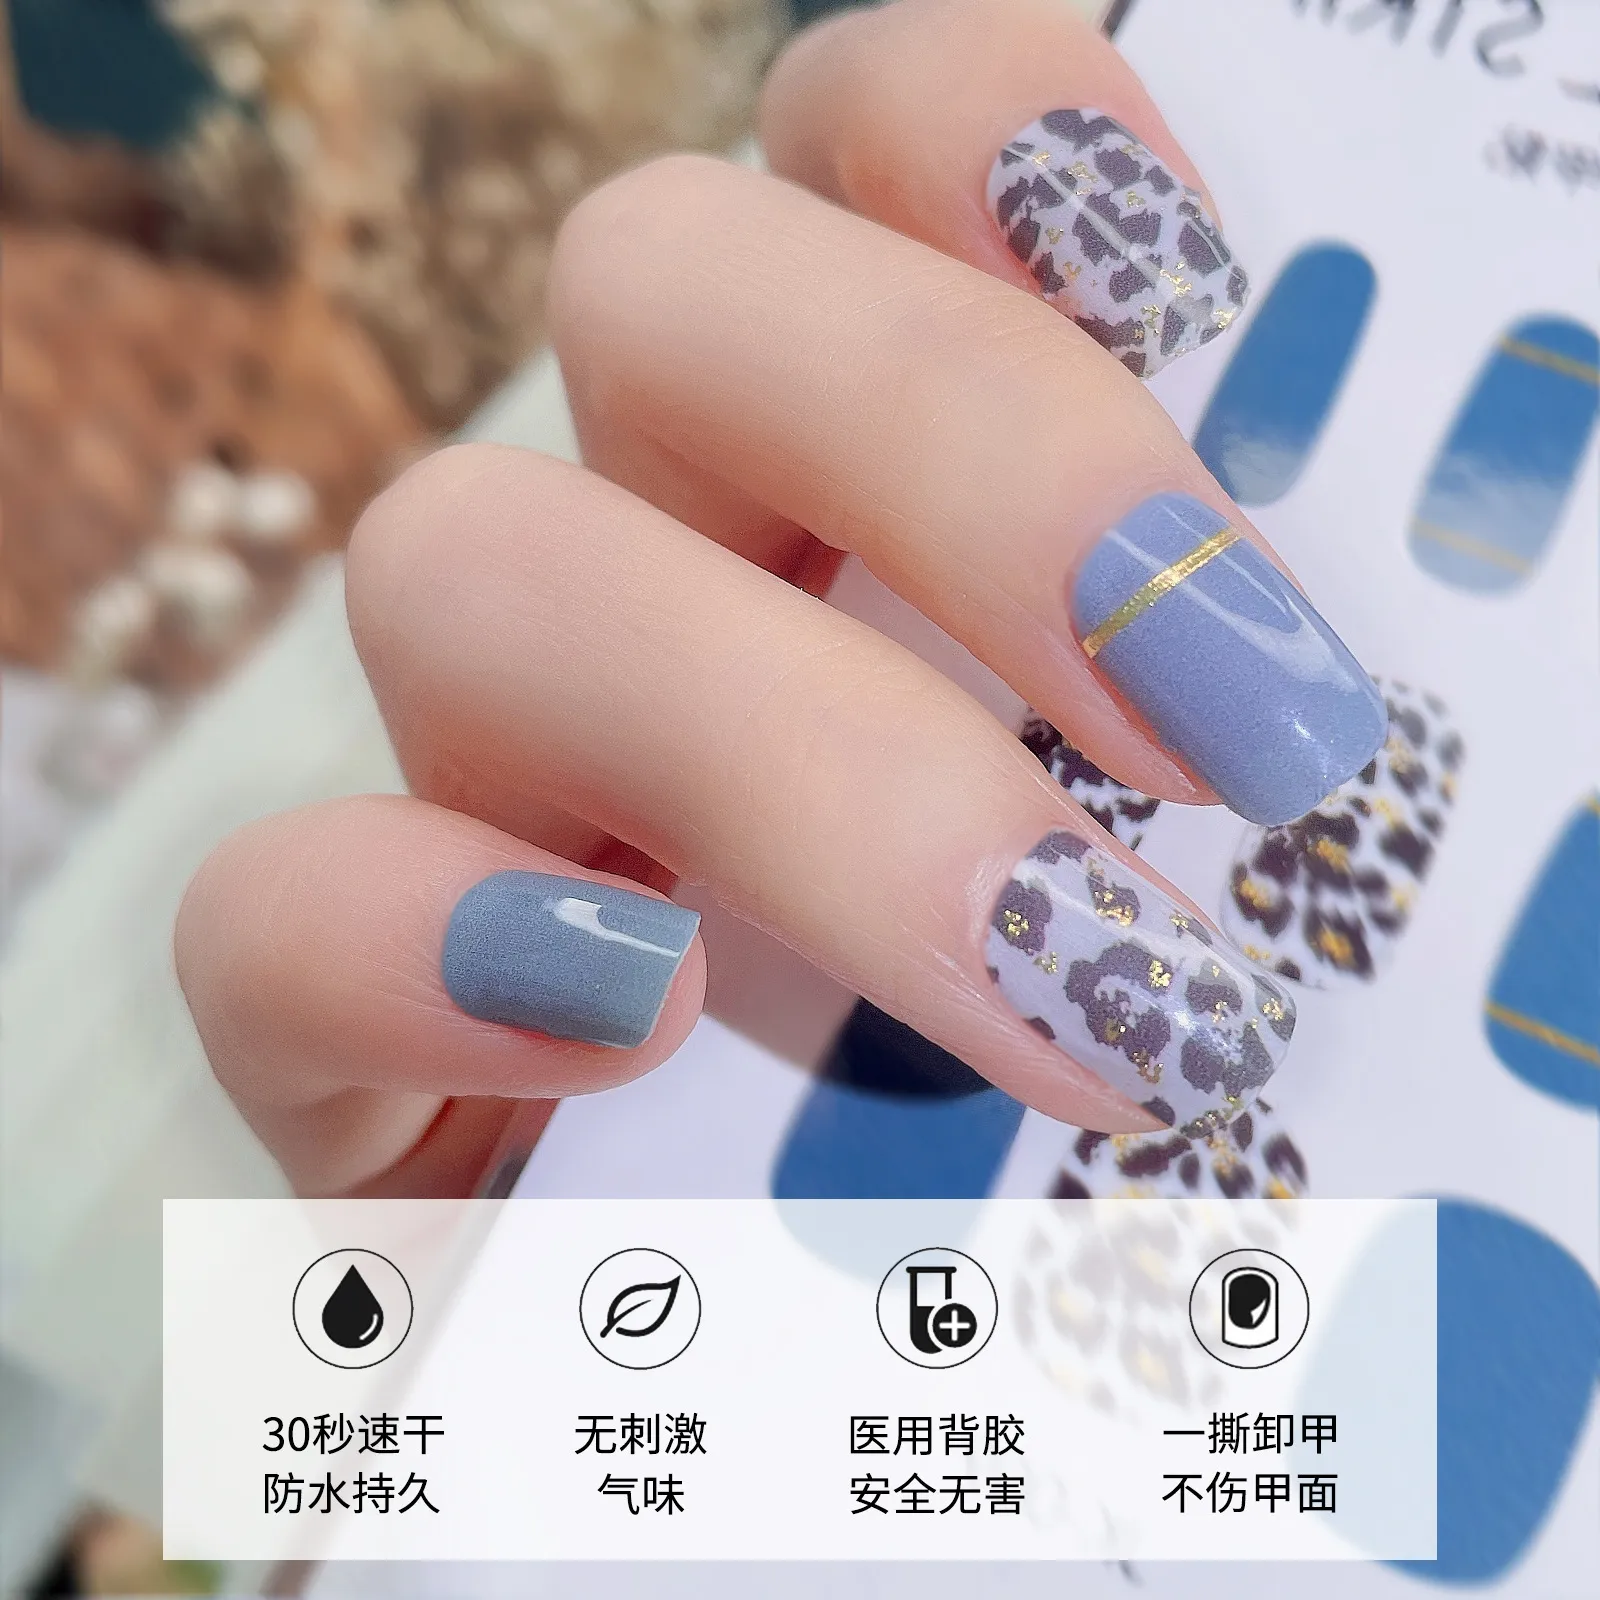 UV Phototherapy Semi Cured French Gel Nail Stickers Set Of 20 Small  Adhesive Dots Wraps For Simple, Waterproof Gel Application From Omnigift06,  $9.85 | DHgate.Com